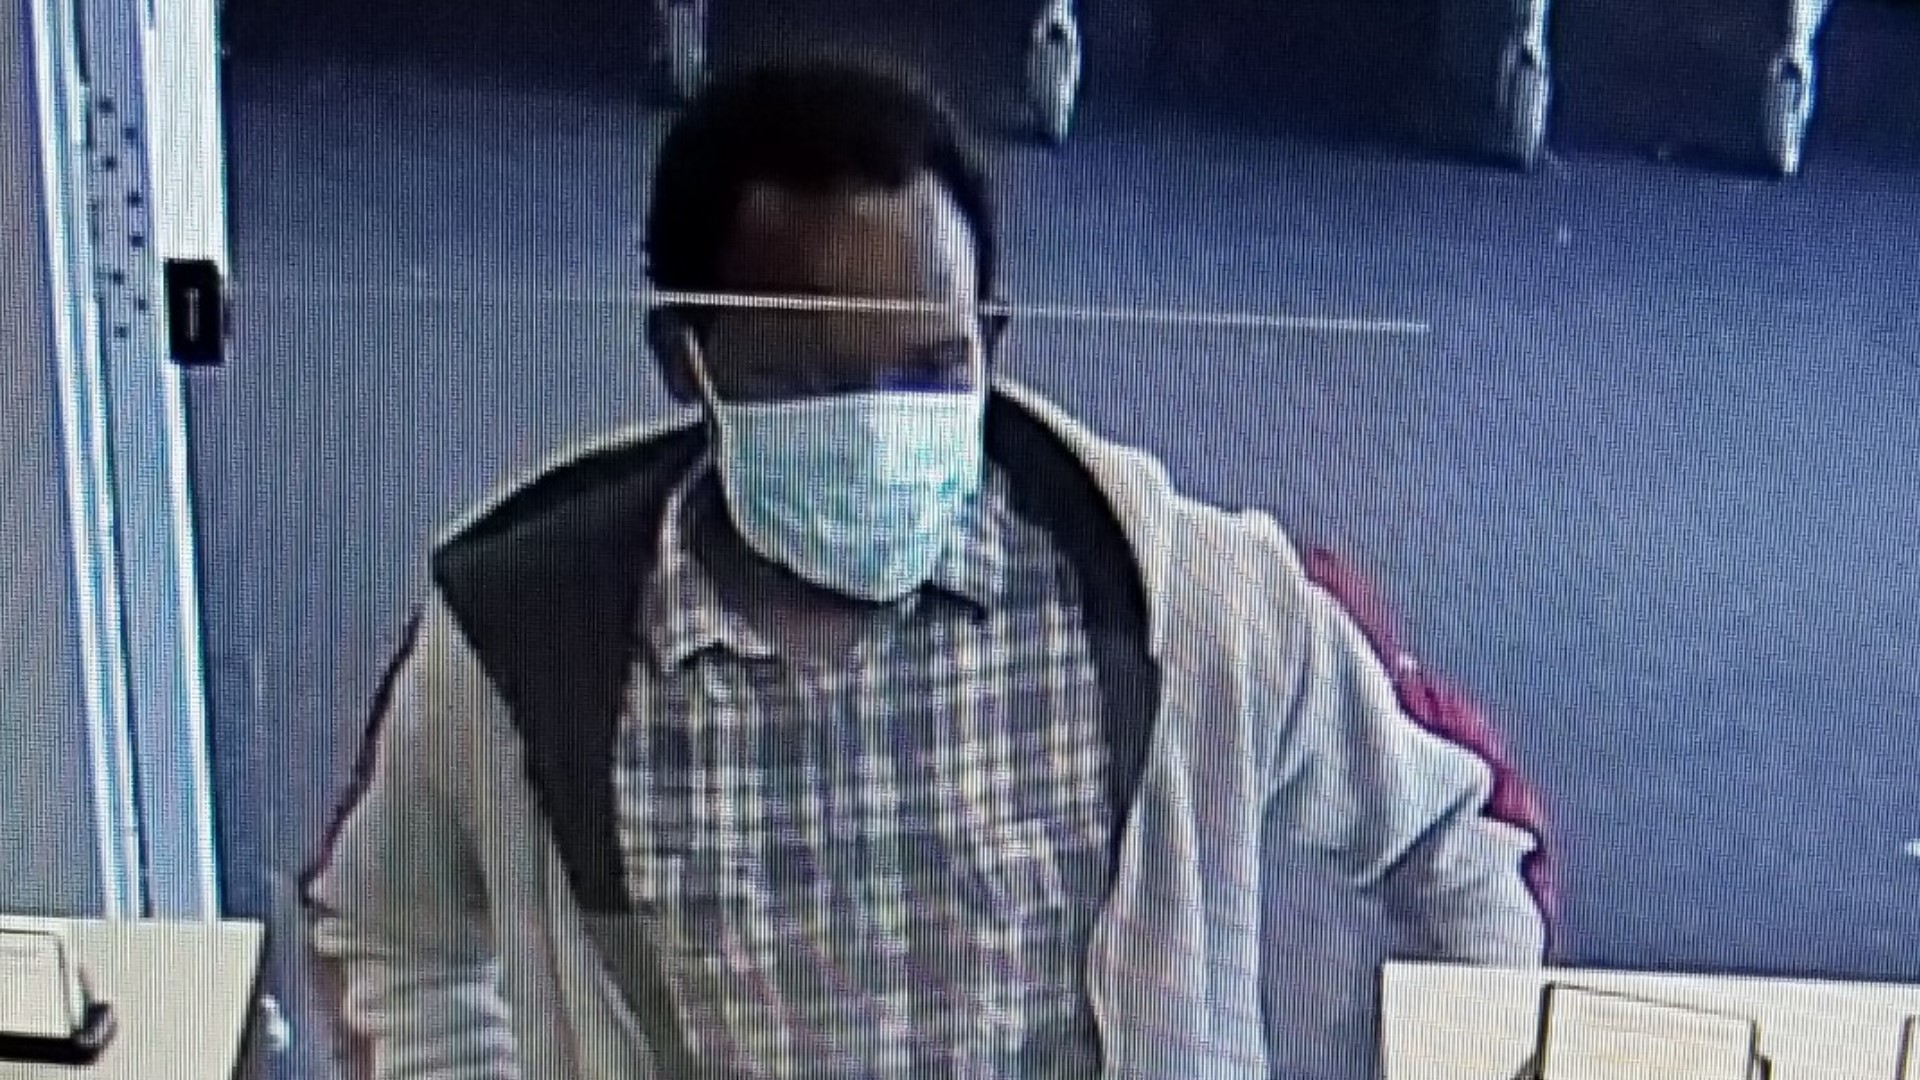 Surveillance footage from the Midwest Family Heritage Bank identifies the suspect as a Black man between 30 to 40 years old.